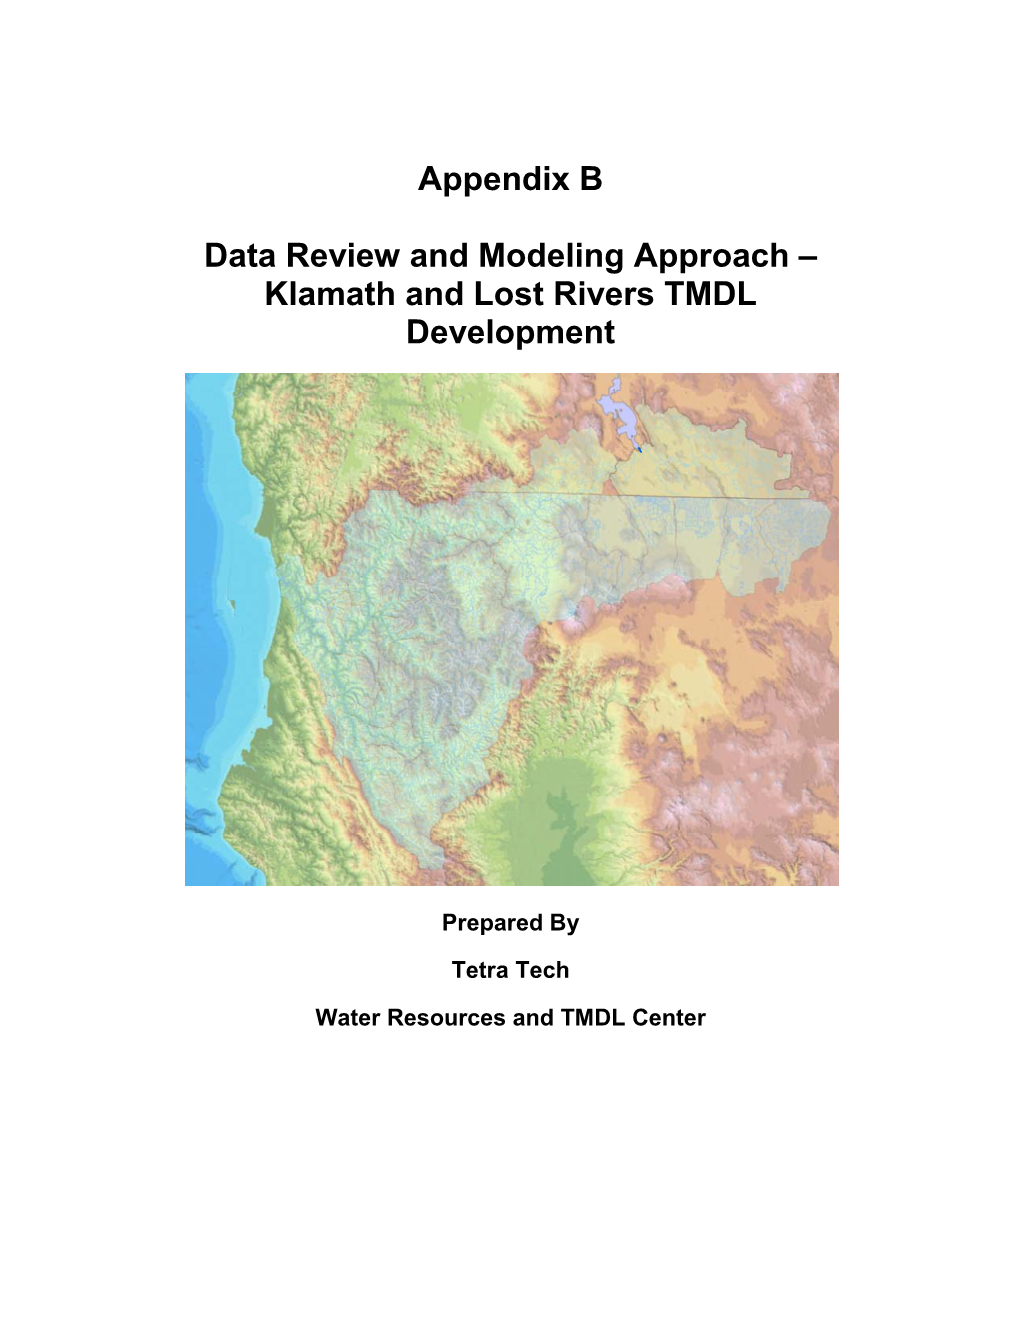 Klamath and Lost Rivers Data Review and Approach Final 4 23 04